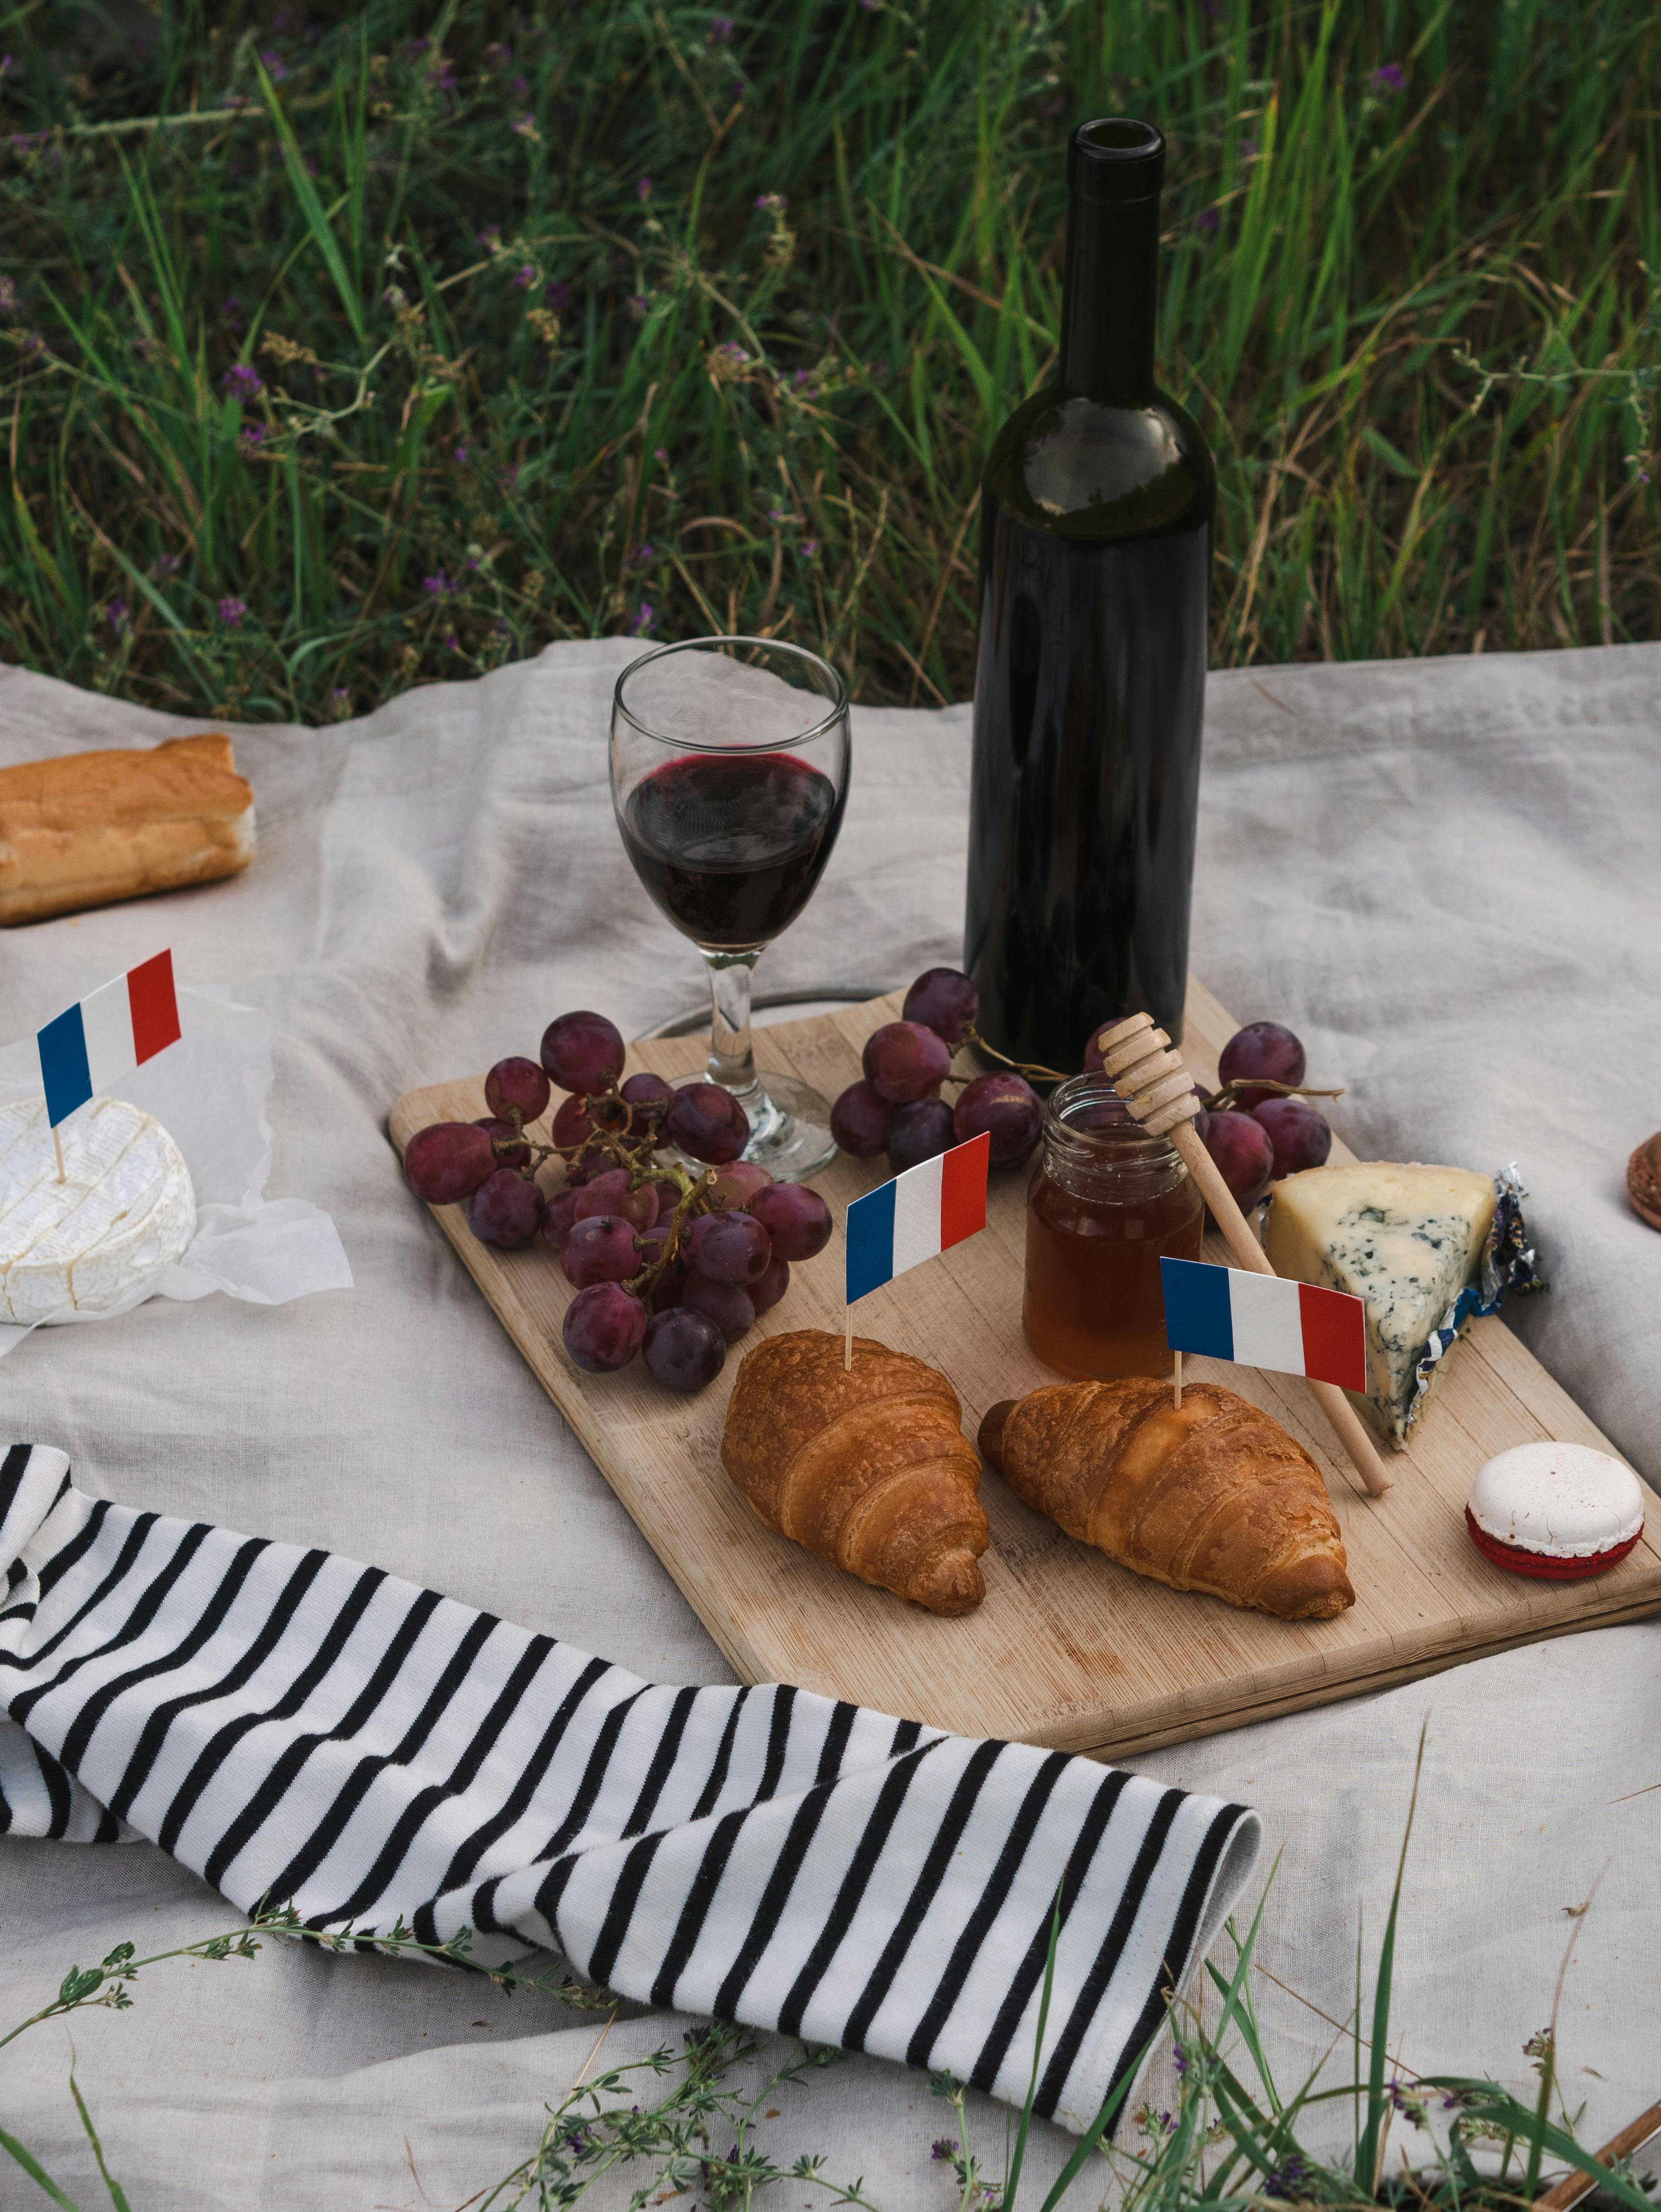 pastries and fruits with glass of wine on picnic blanket